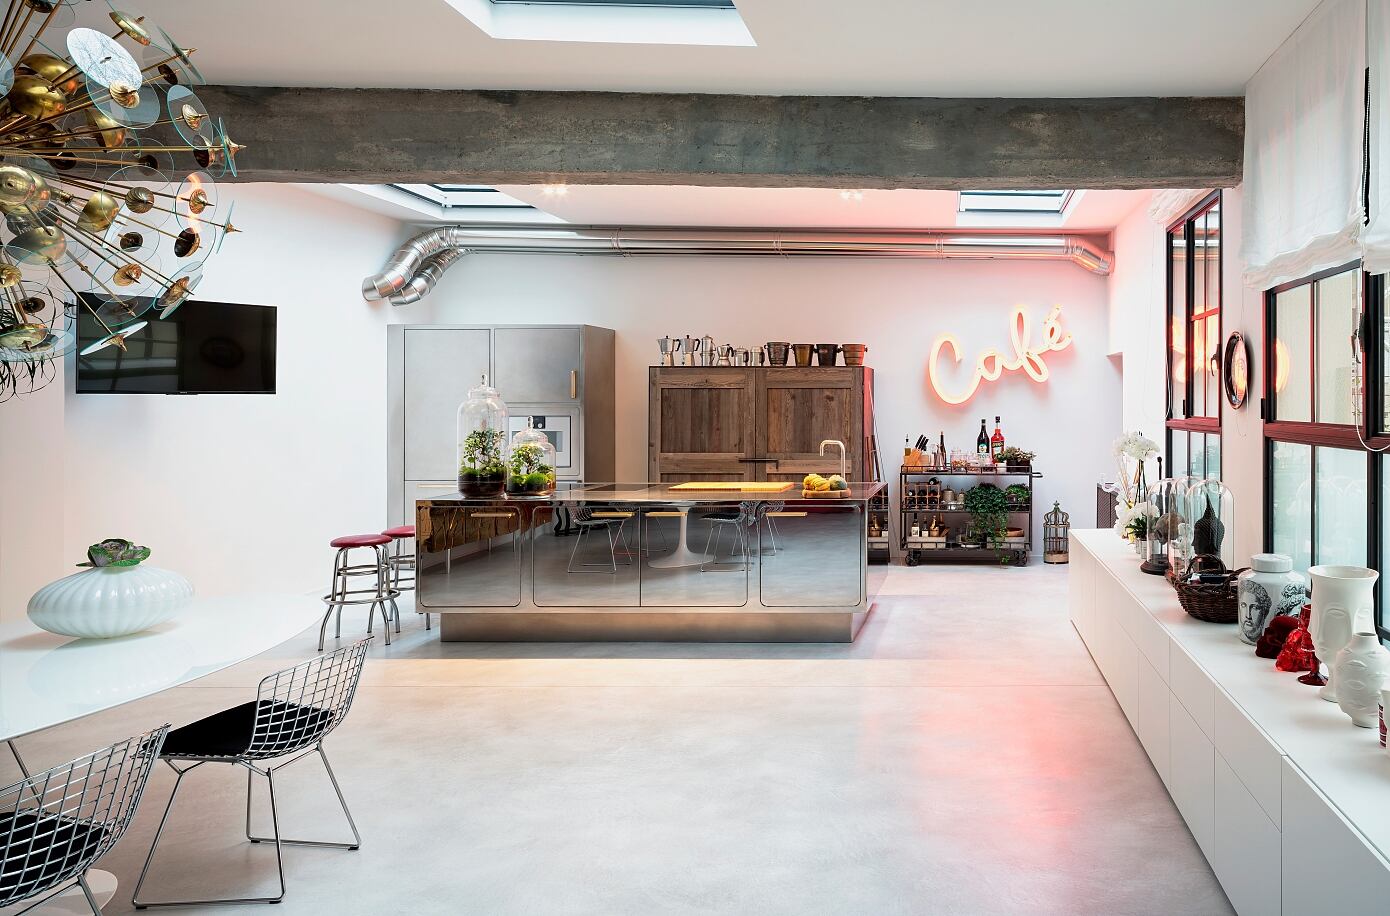 Loft in Florence by Abimis is a Prisma